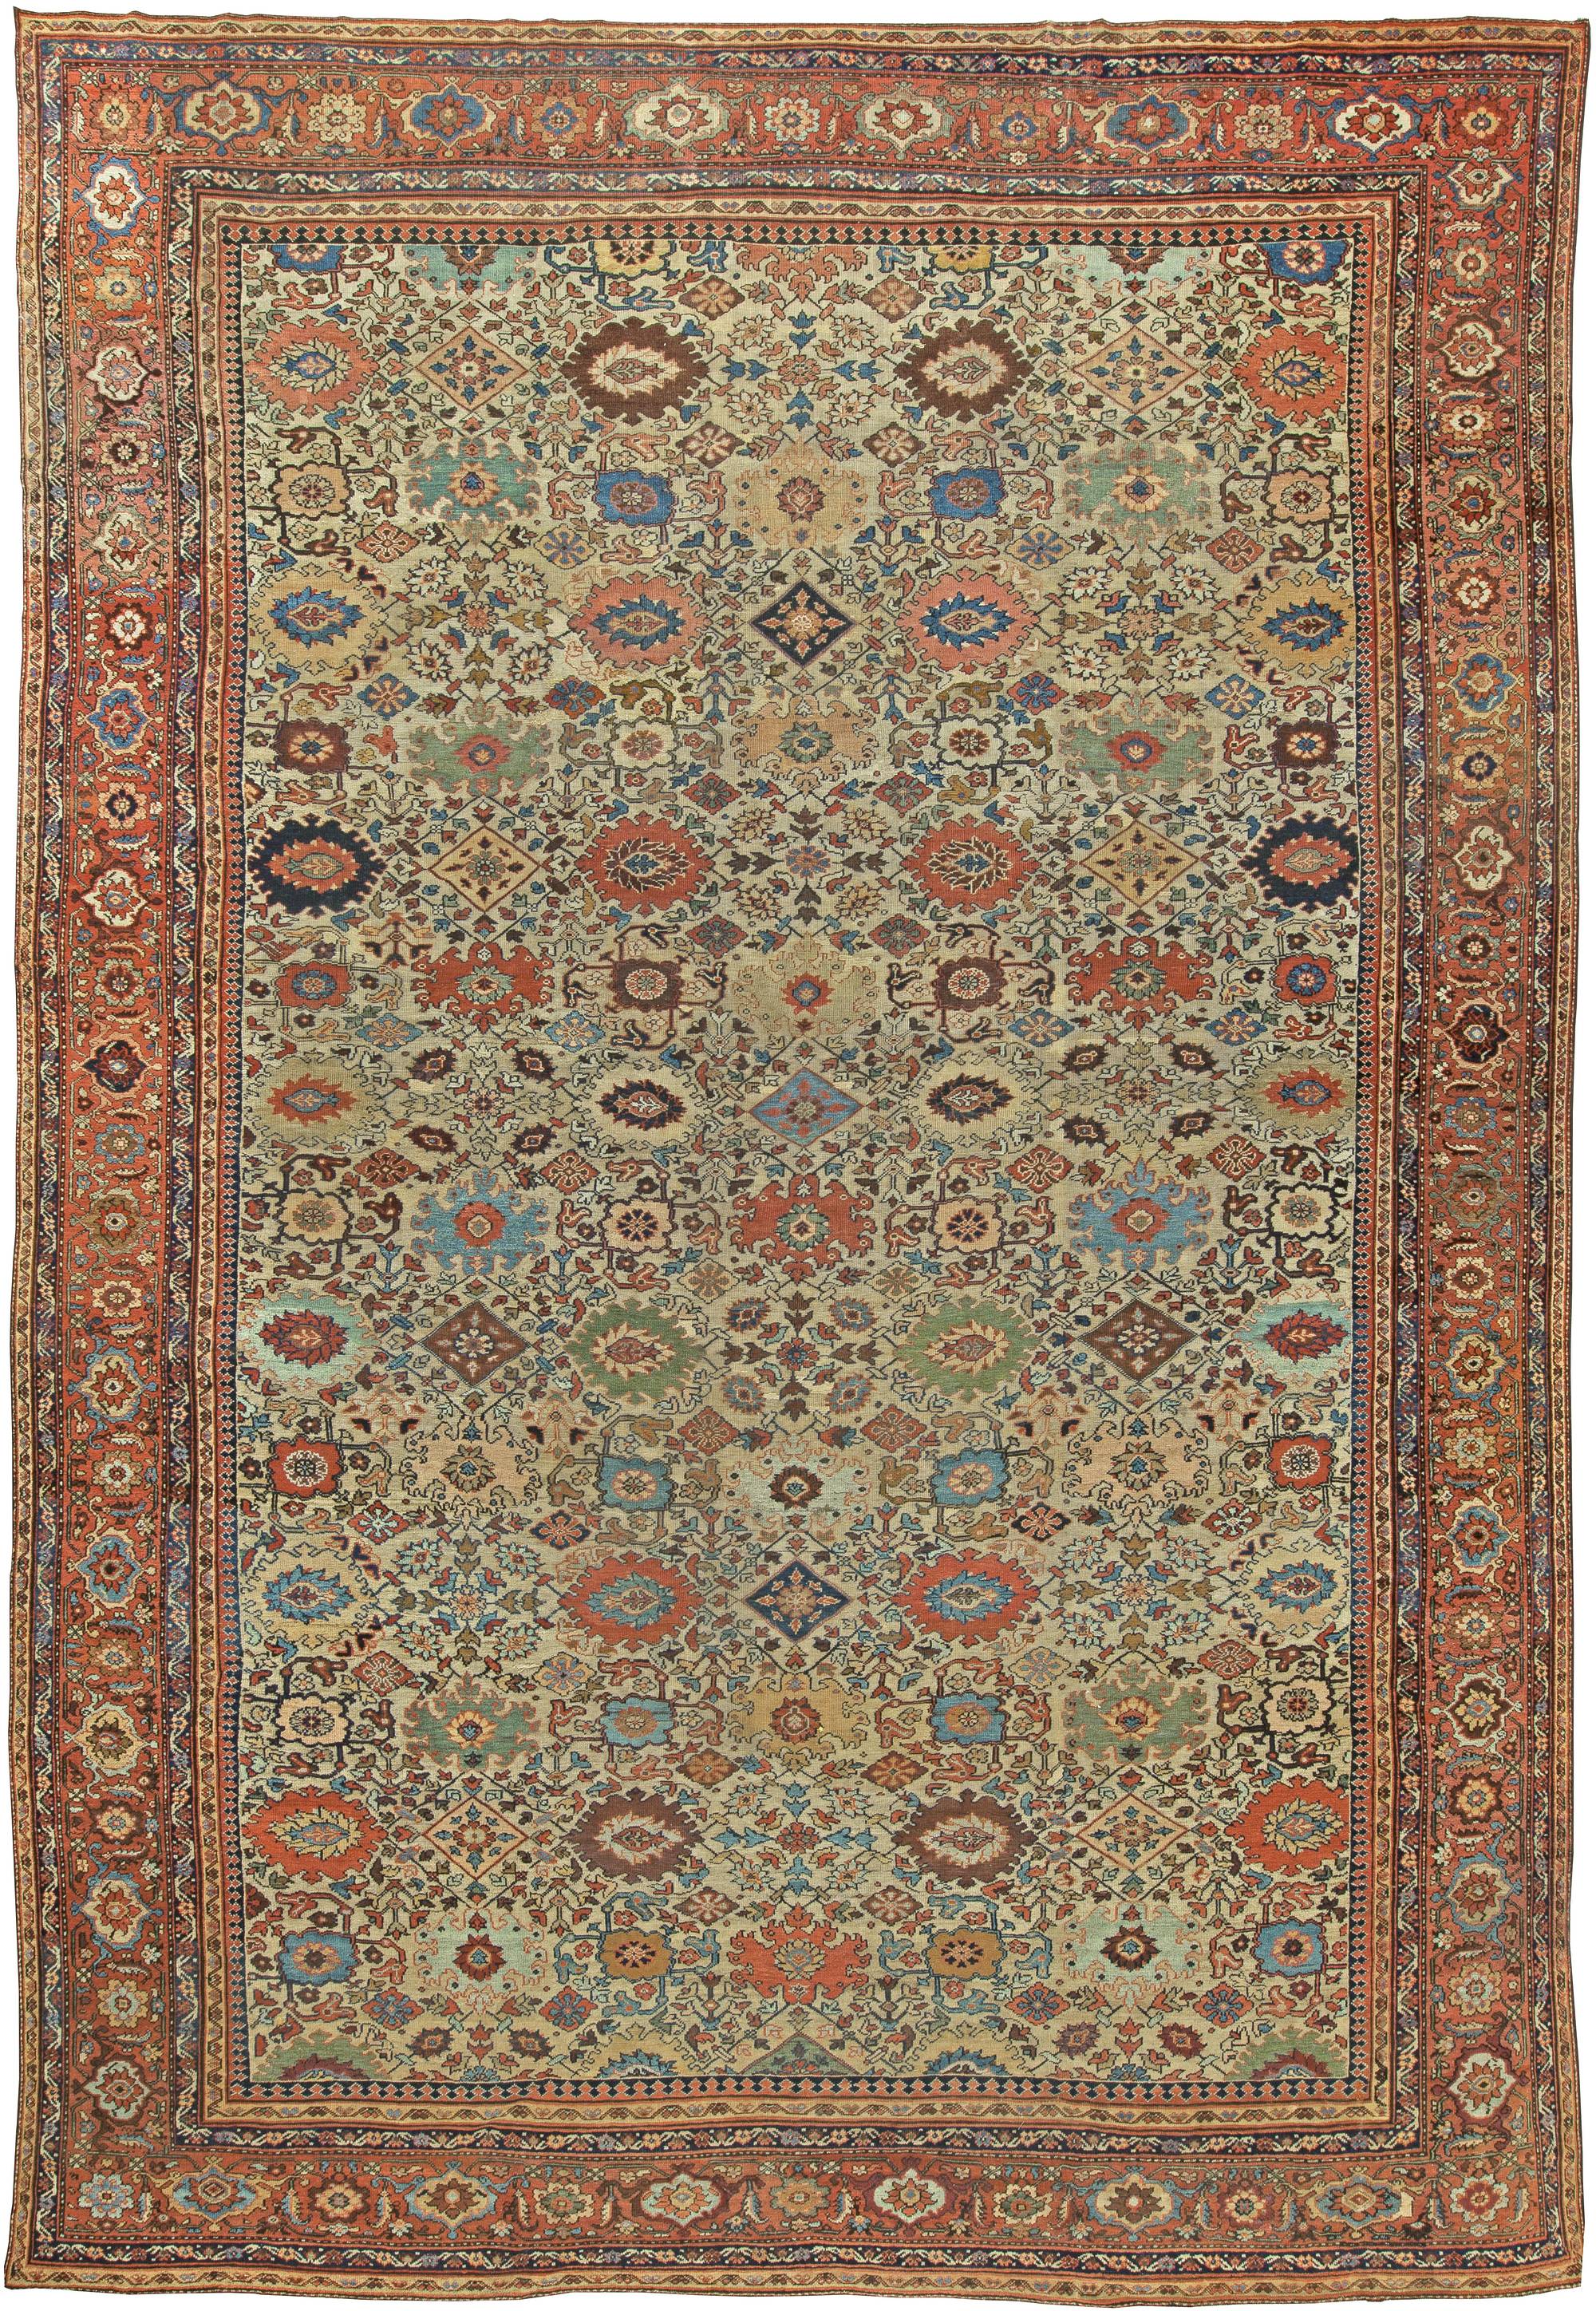 Types of antique rugs for making your home beautiful